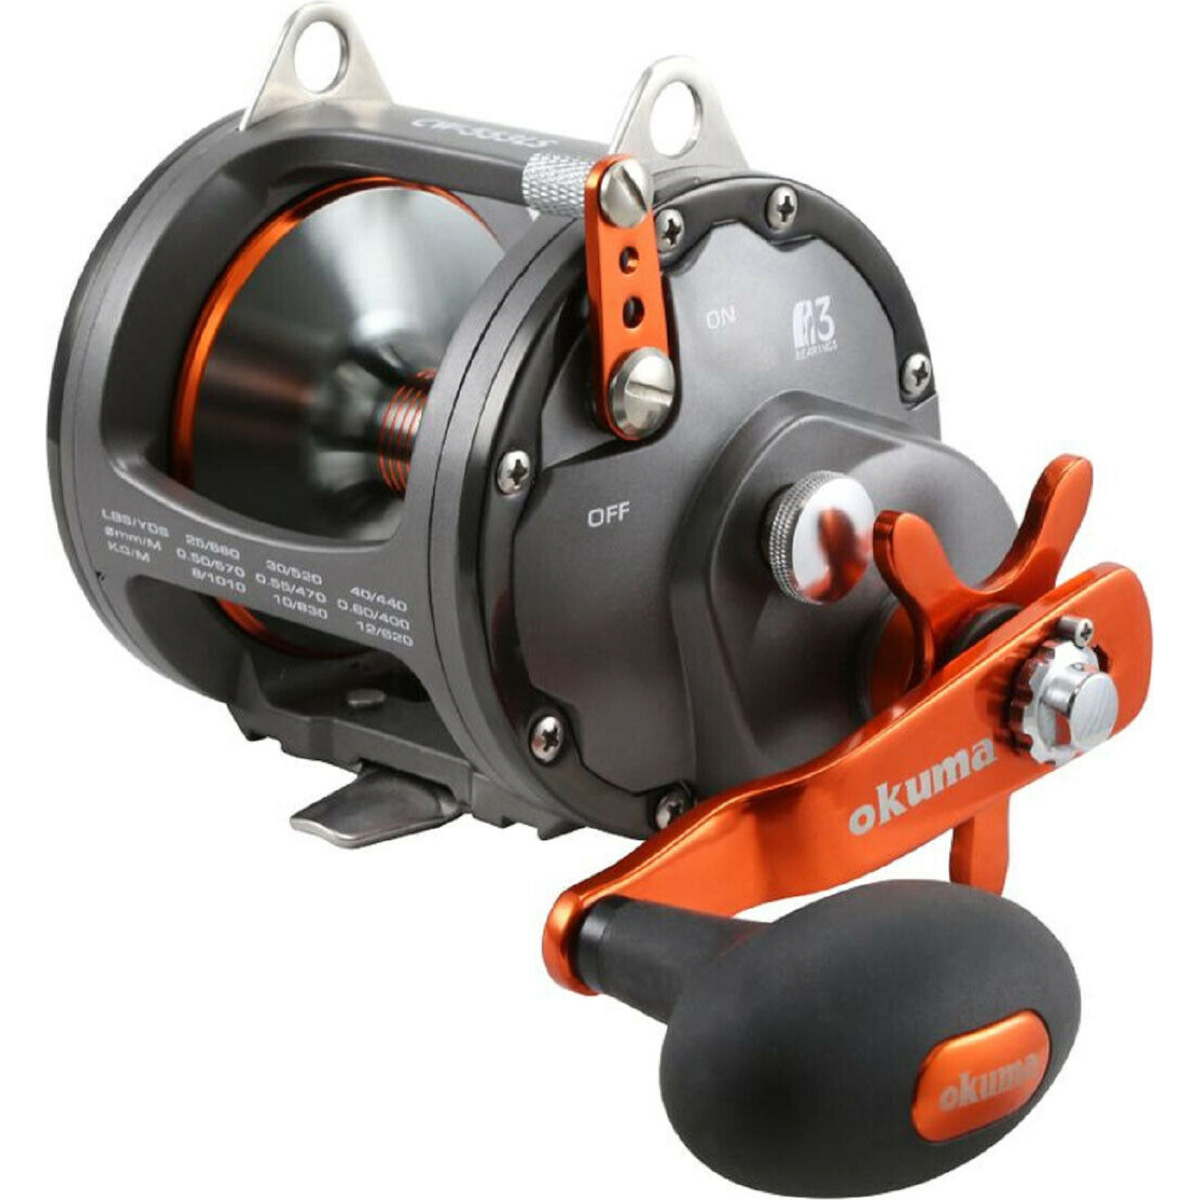 Photo of Okuma Cold Water Wire Line Star Drag Reel for sale at United Tackle Shops.